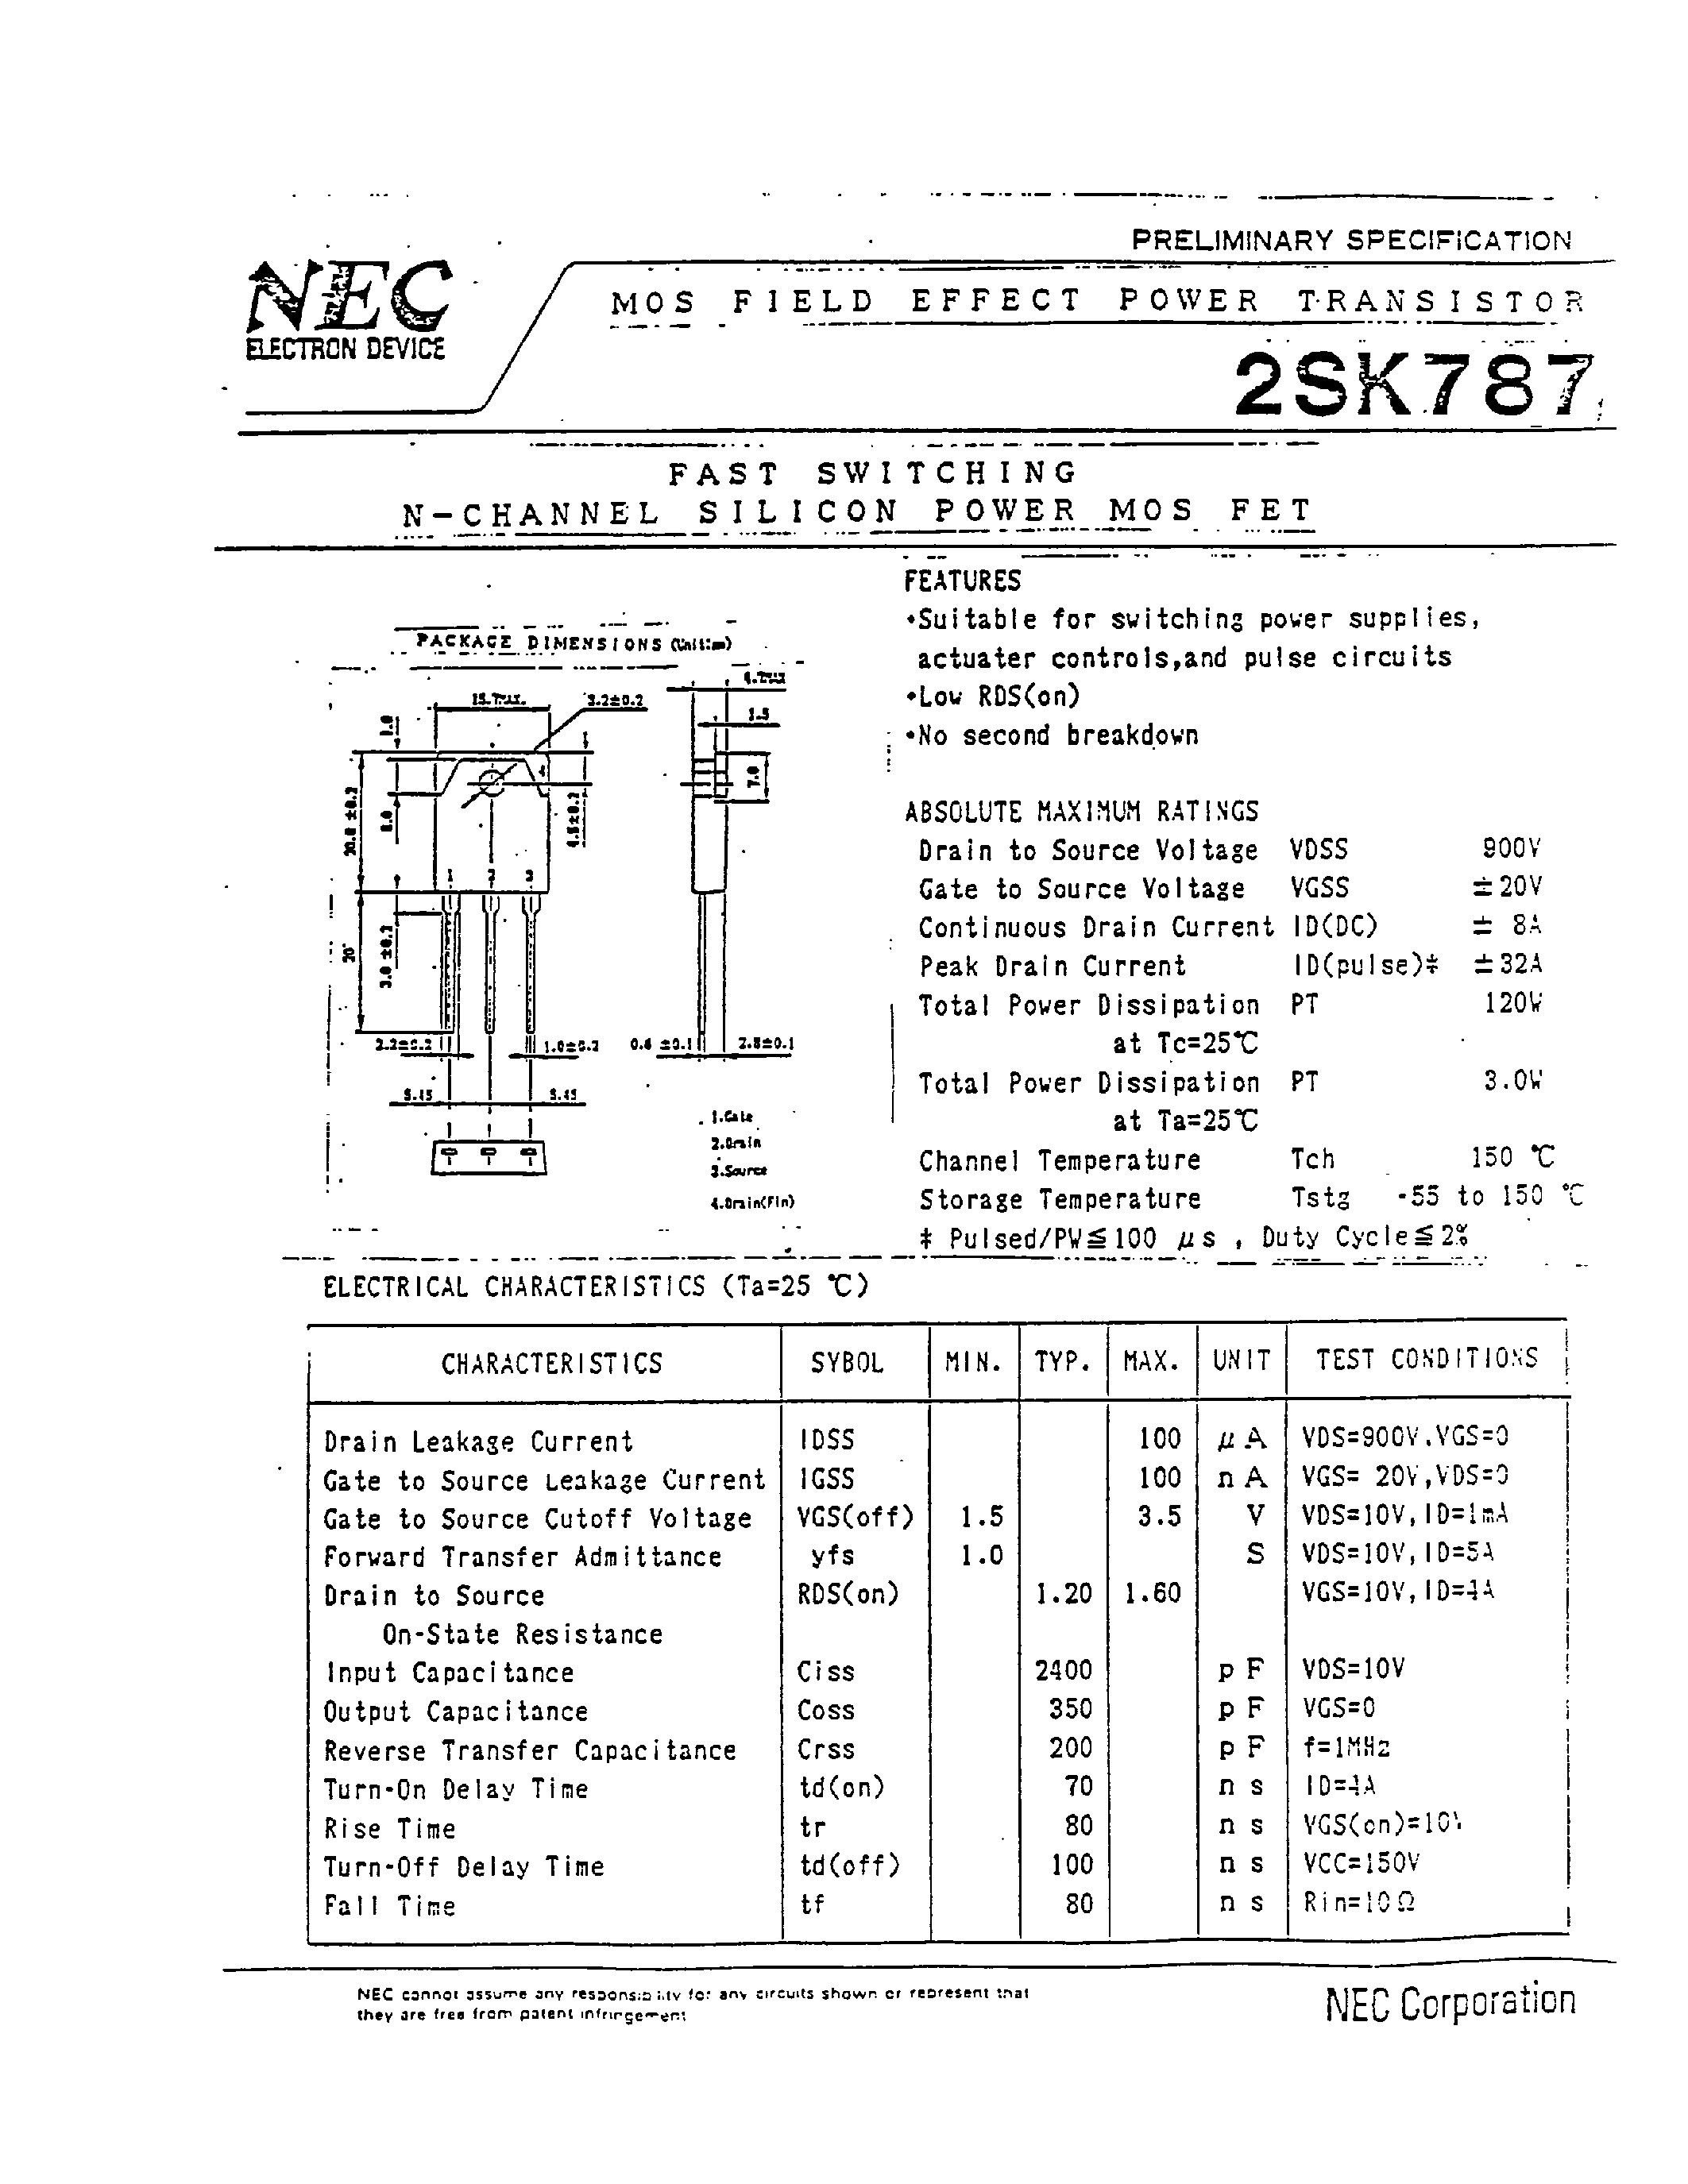 Datasheet K787 - Search -----> 2SK787 page 1